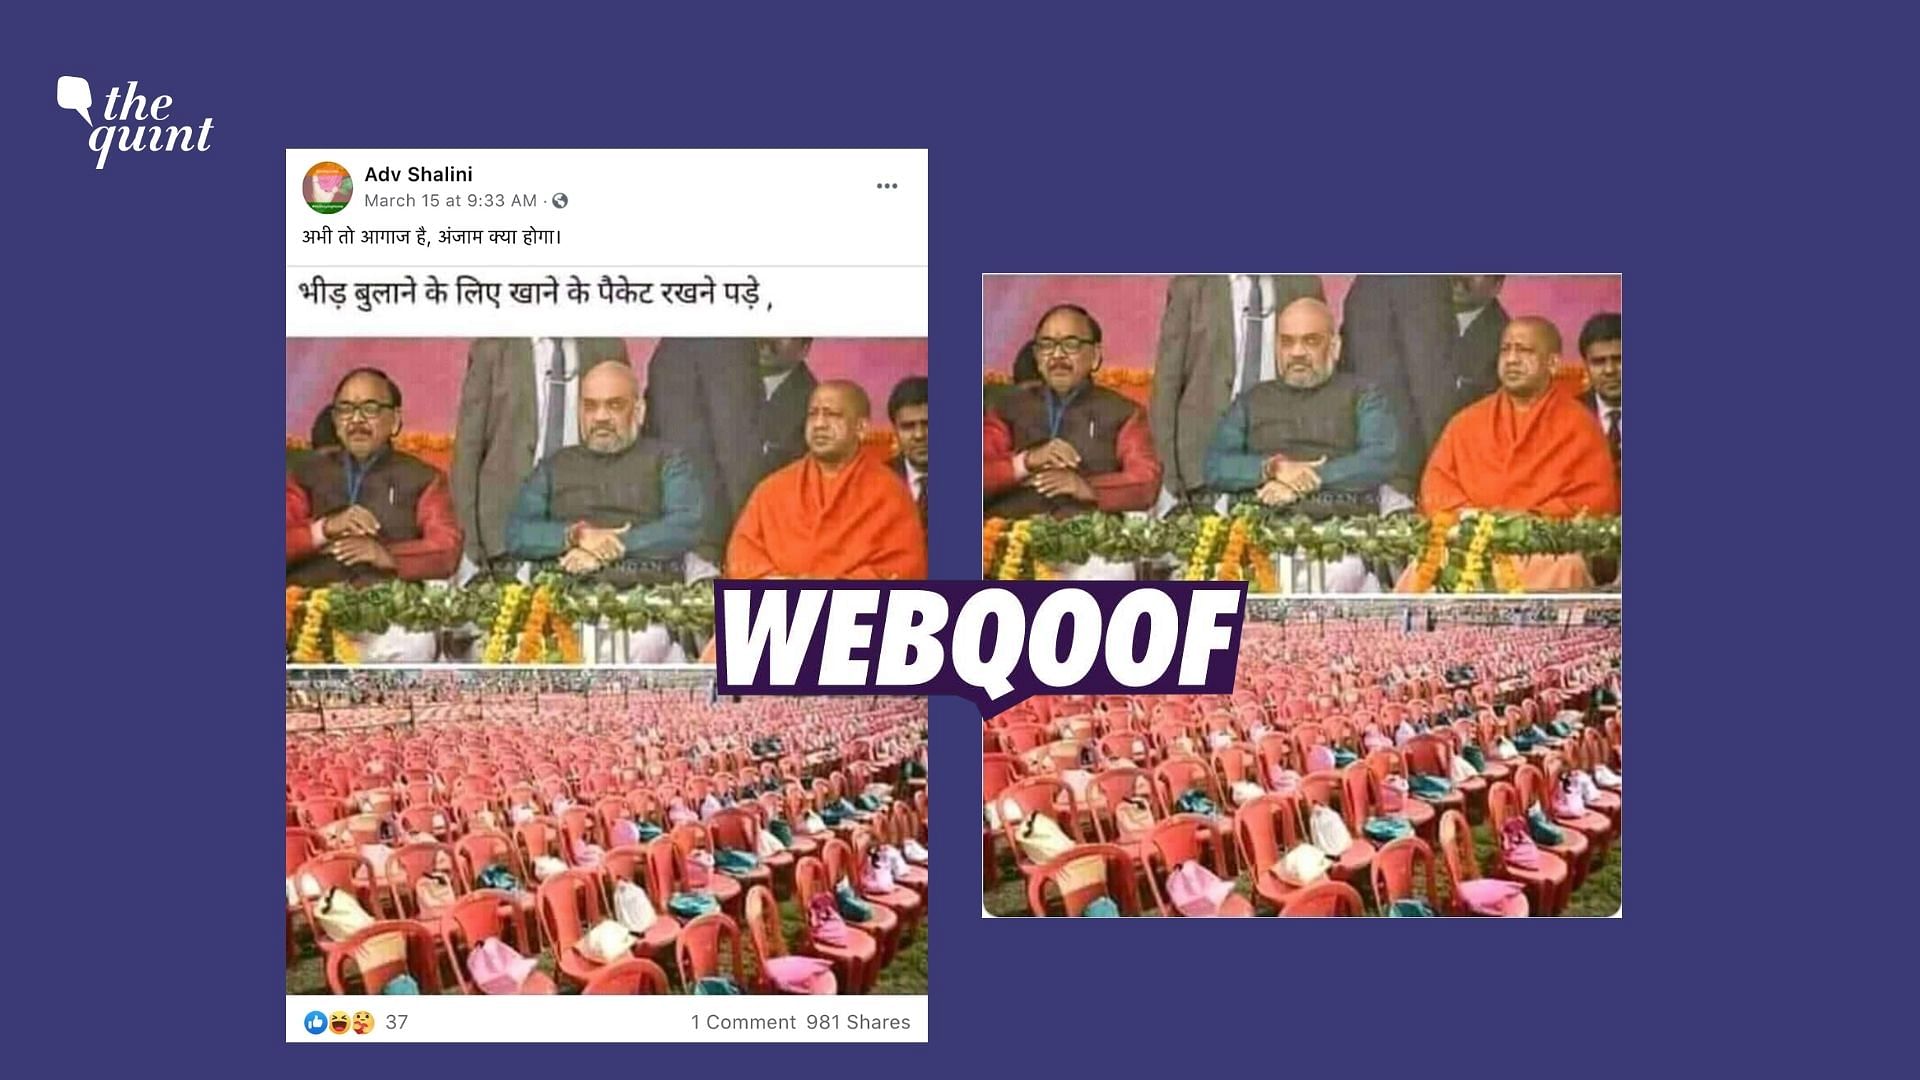 Old images from Home Minister Amit Shah’s address in Varanasi have been revived amid the ongoing election season.